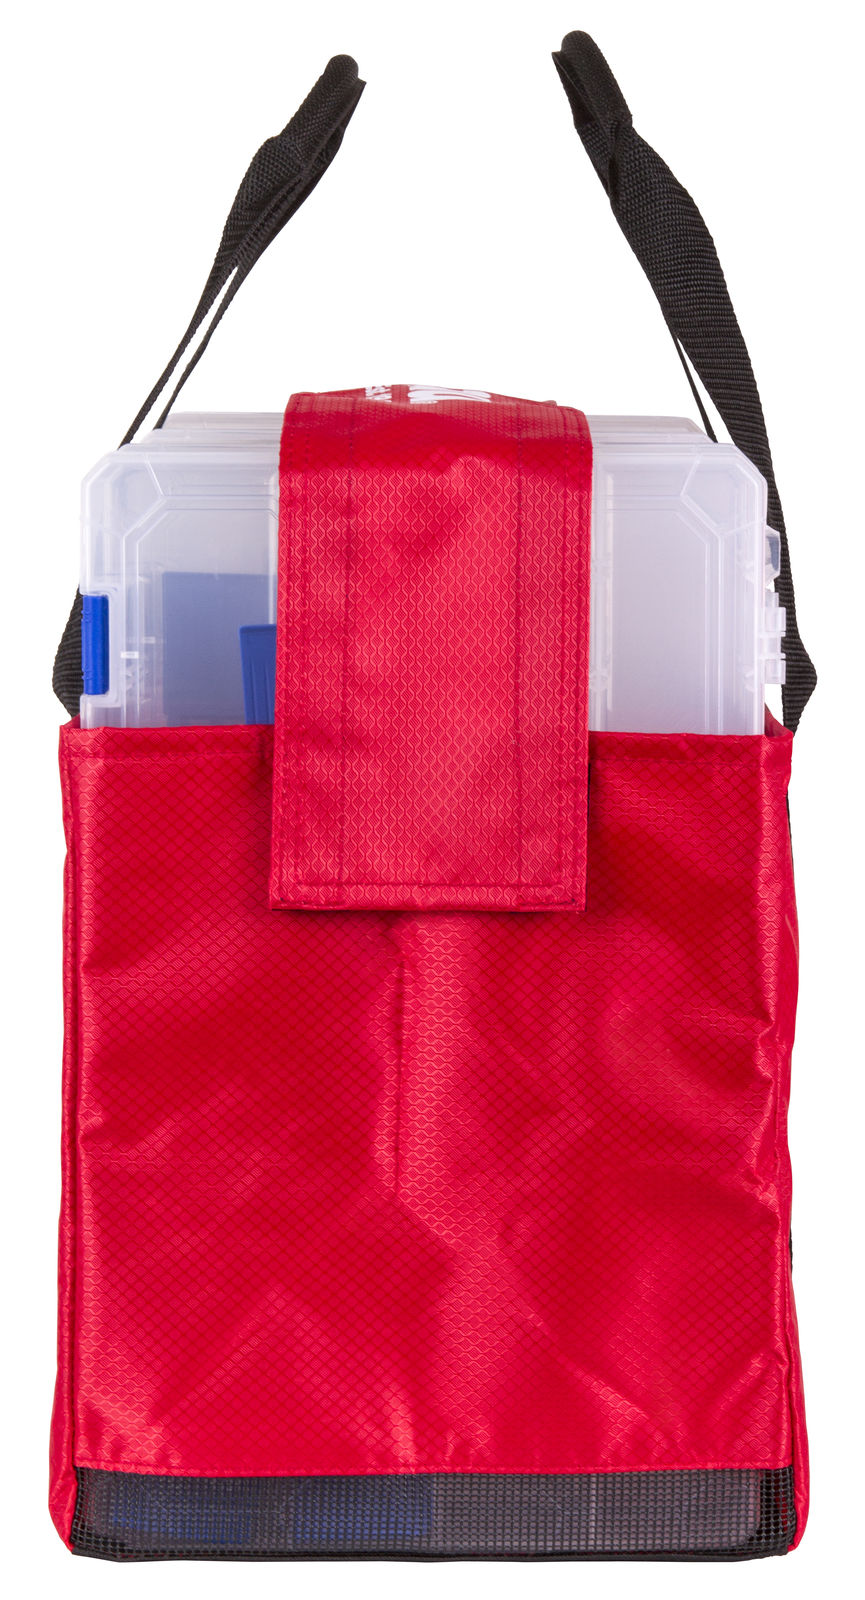 Flambeau Outdoors 5000 Tuff Tainer Tote Large Color Red 071617091729 for sale online 